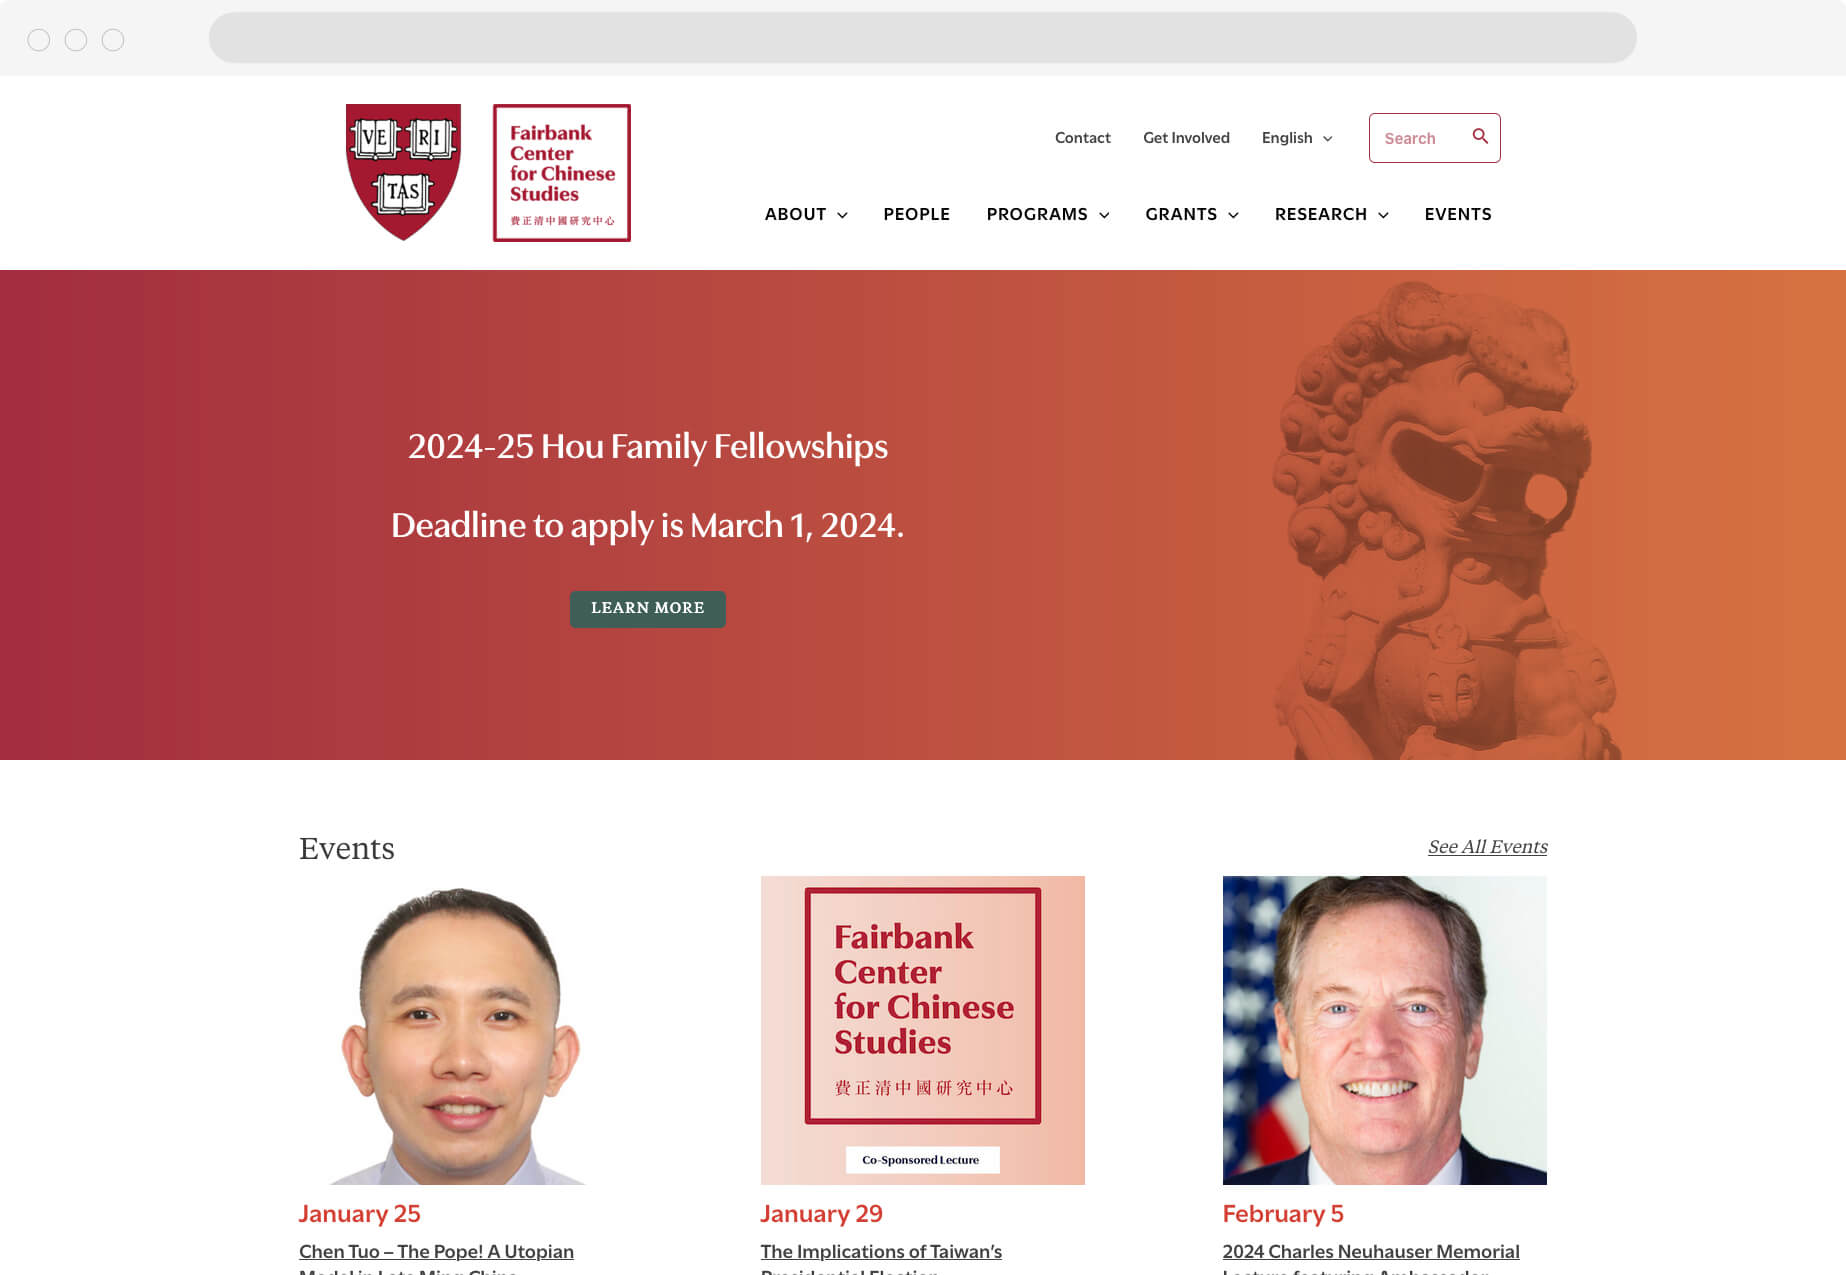 Fairbank Center homepage featuring a captivating red dragon design in the hero area.